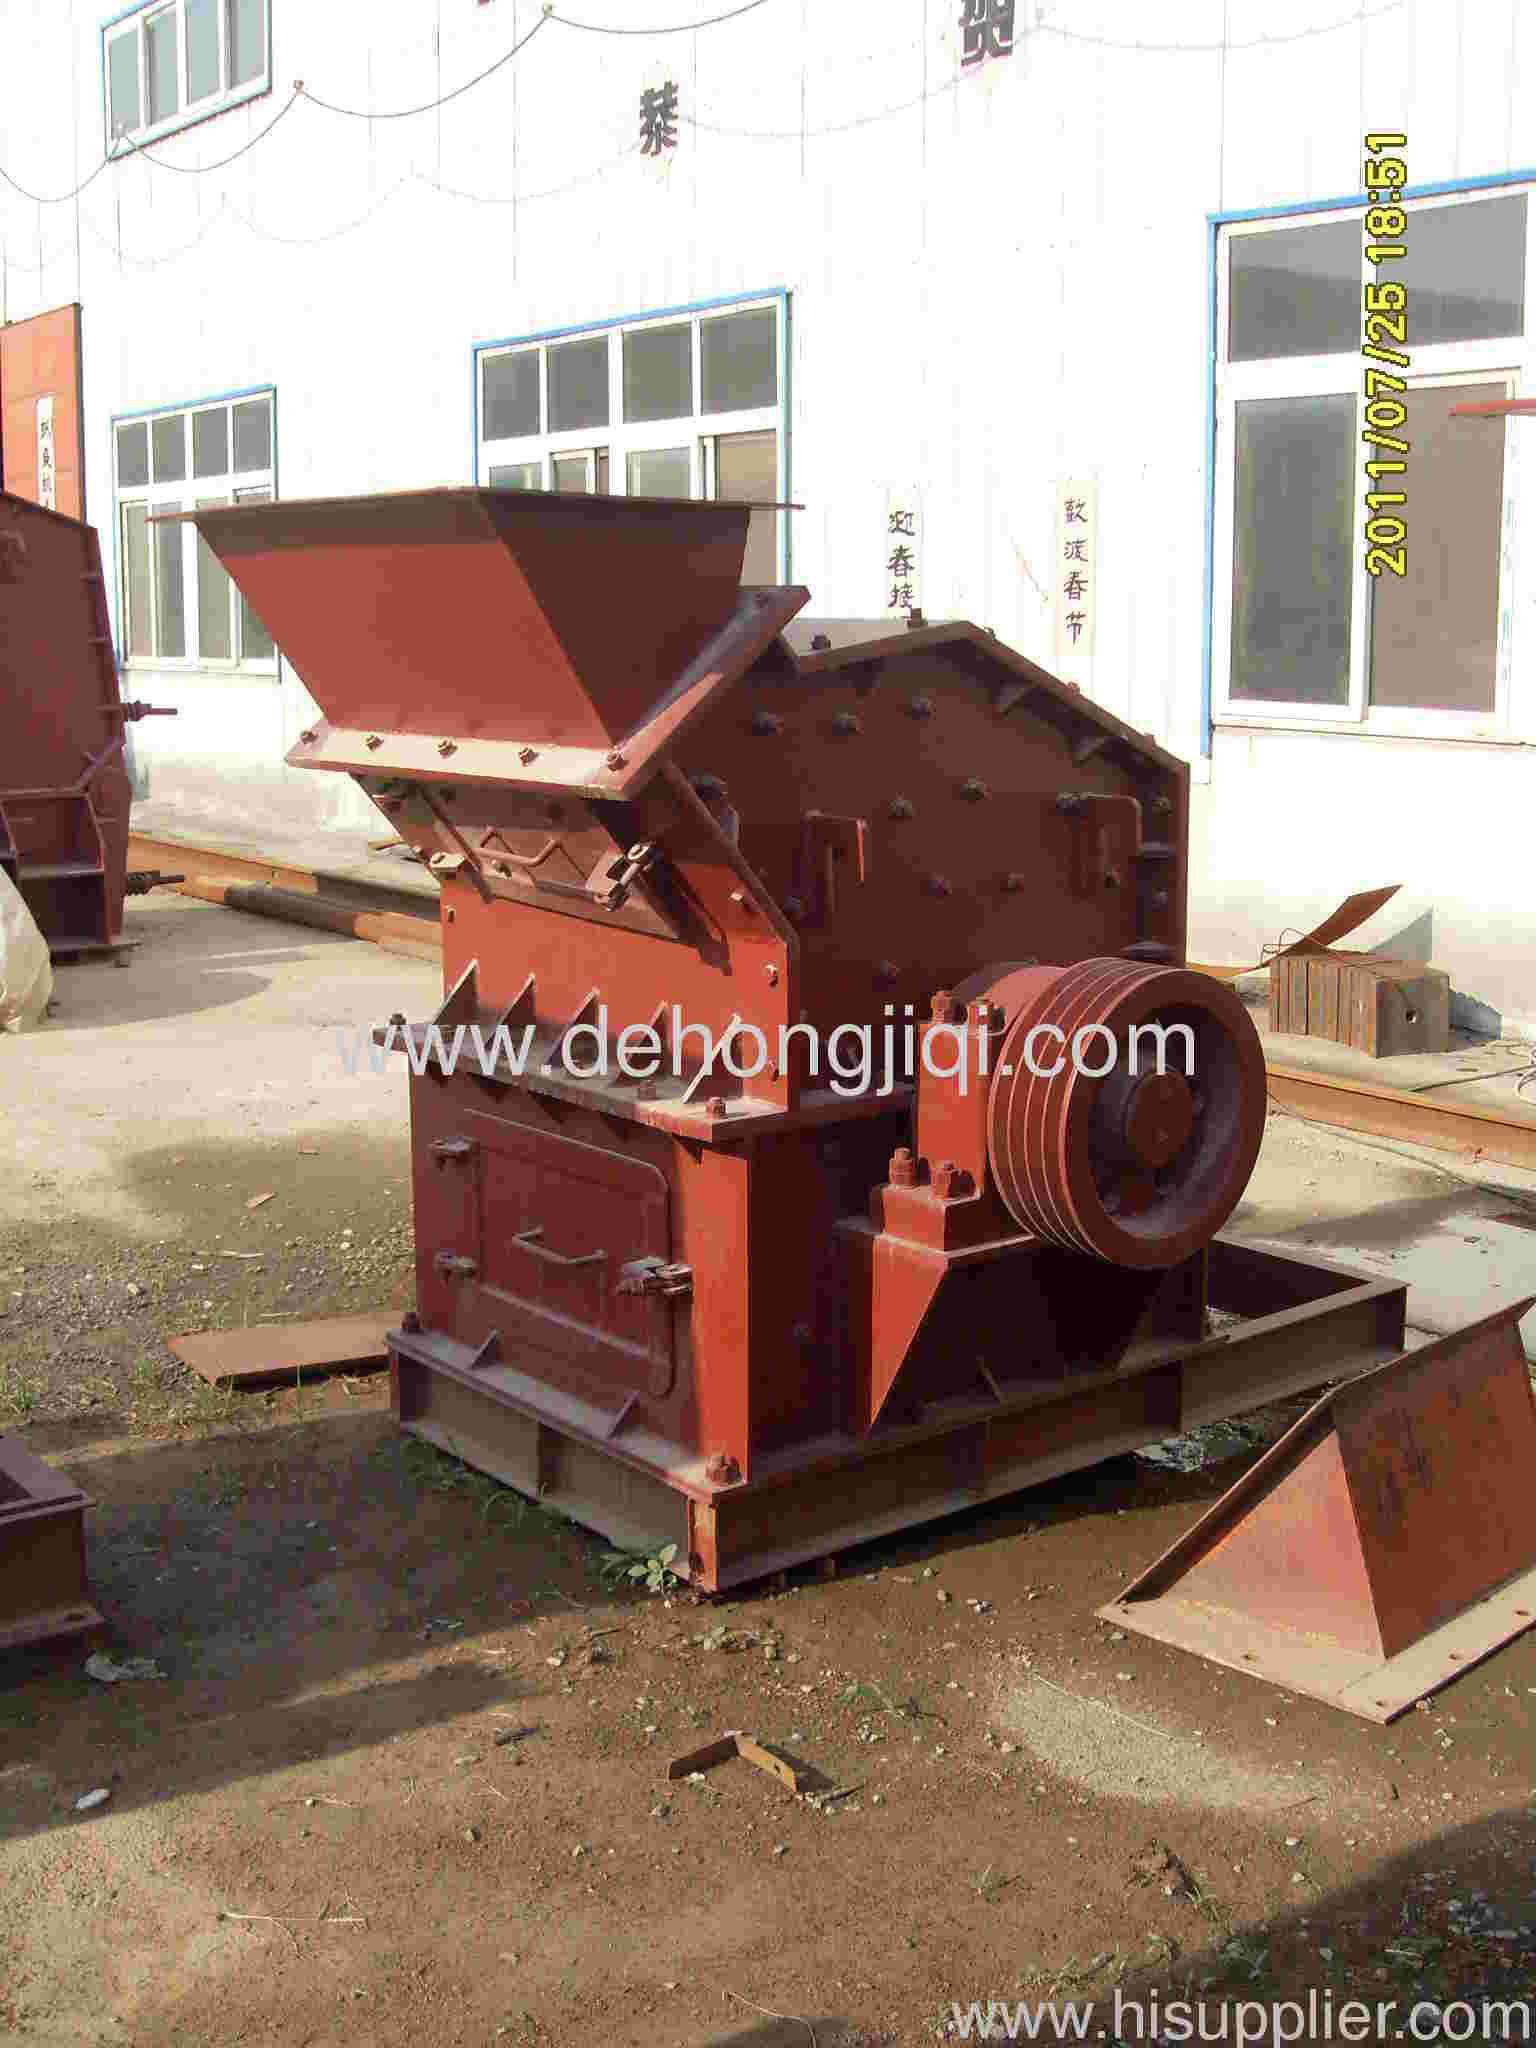 Environment sand maker is the main direction of development